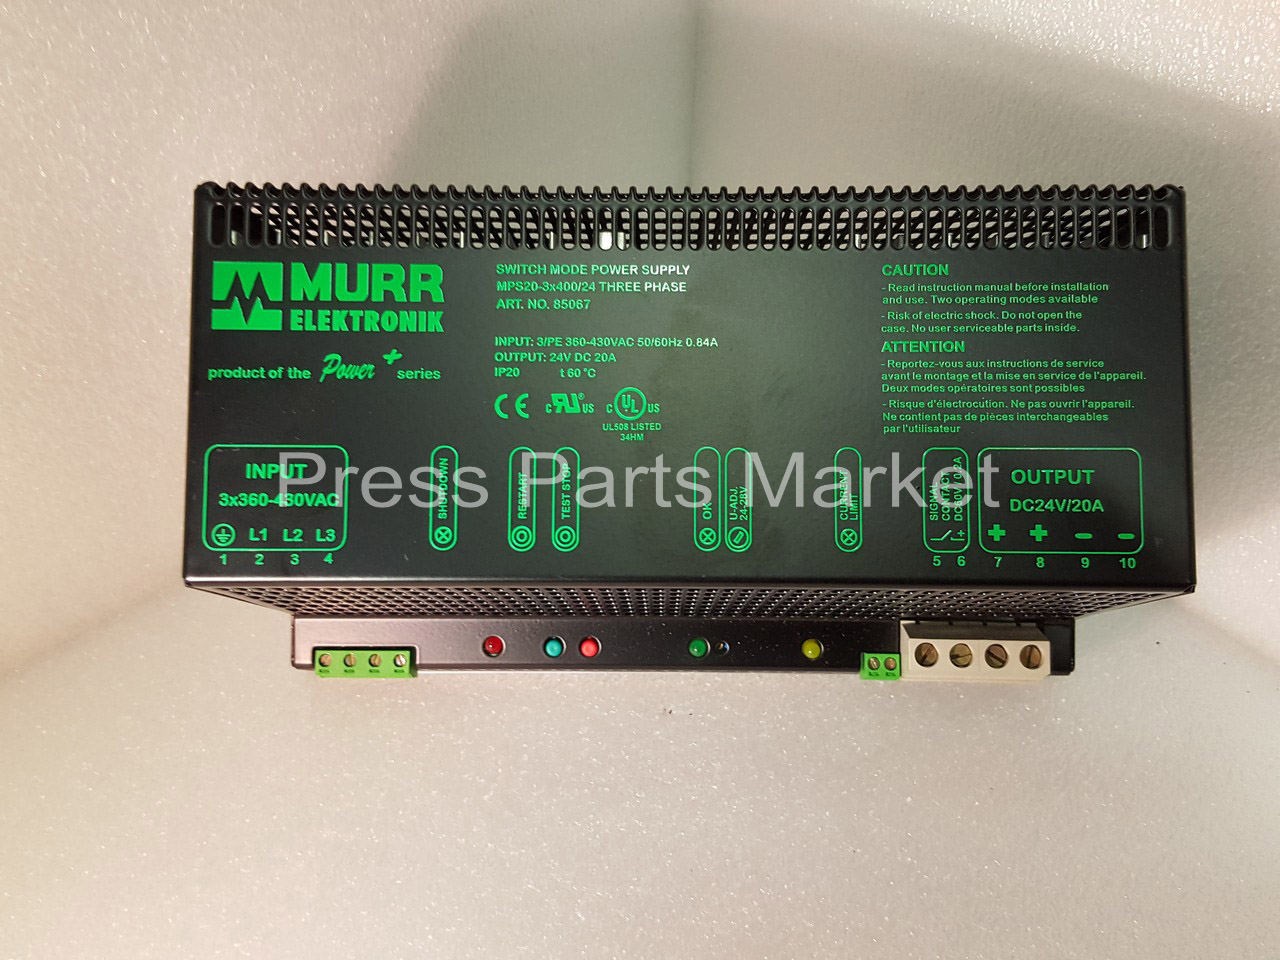 MPS20-3×400-24 - MPS20-3×400-24 - MURR ELECTRONIK THREE-PHASE SWITCH MODE POWER SUPPLY - 